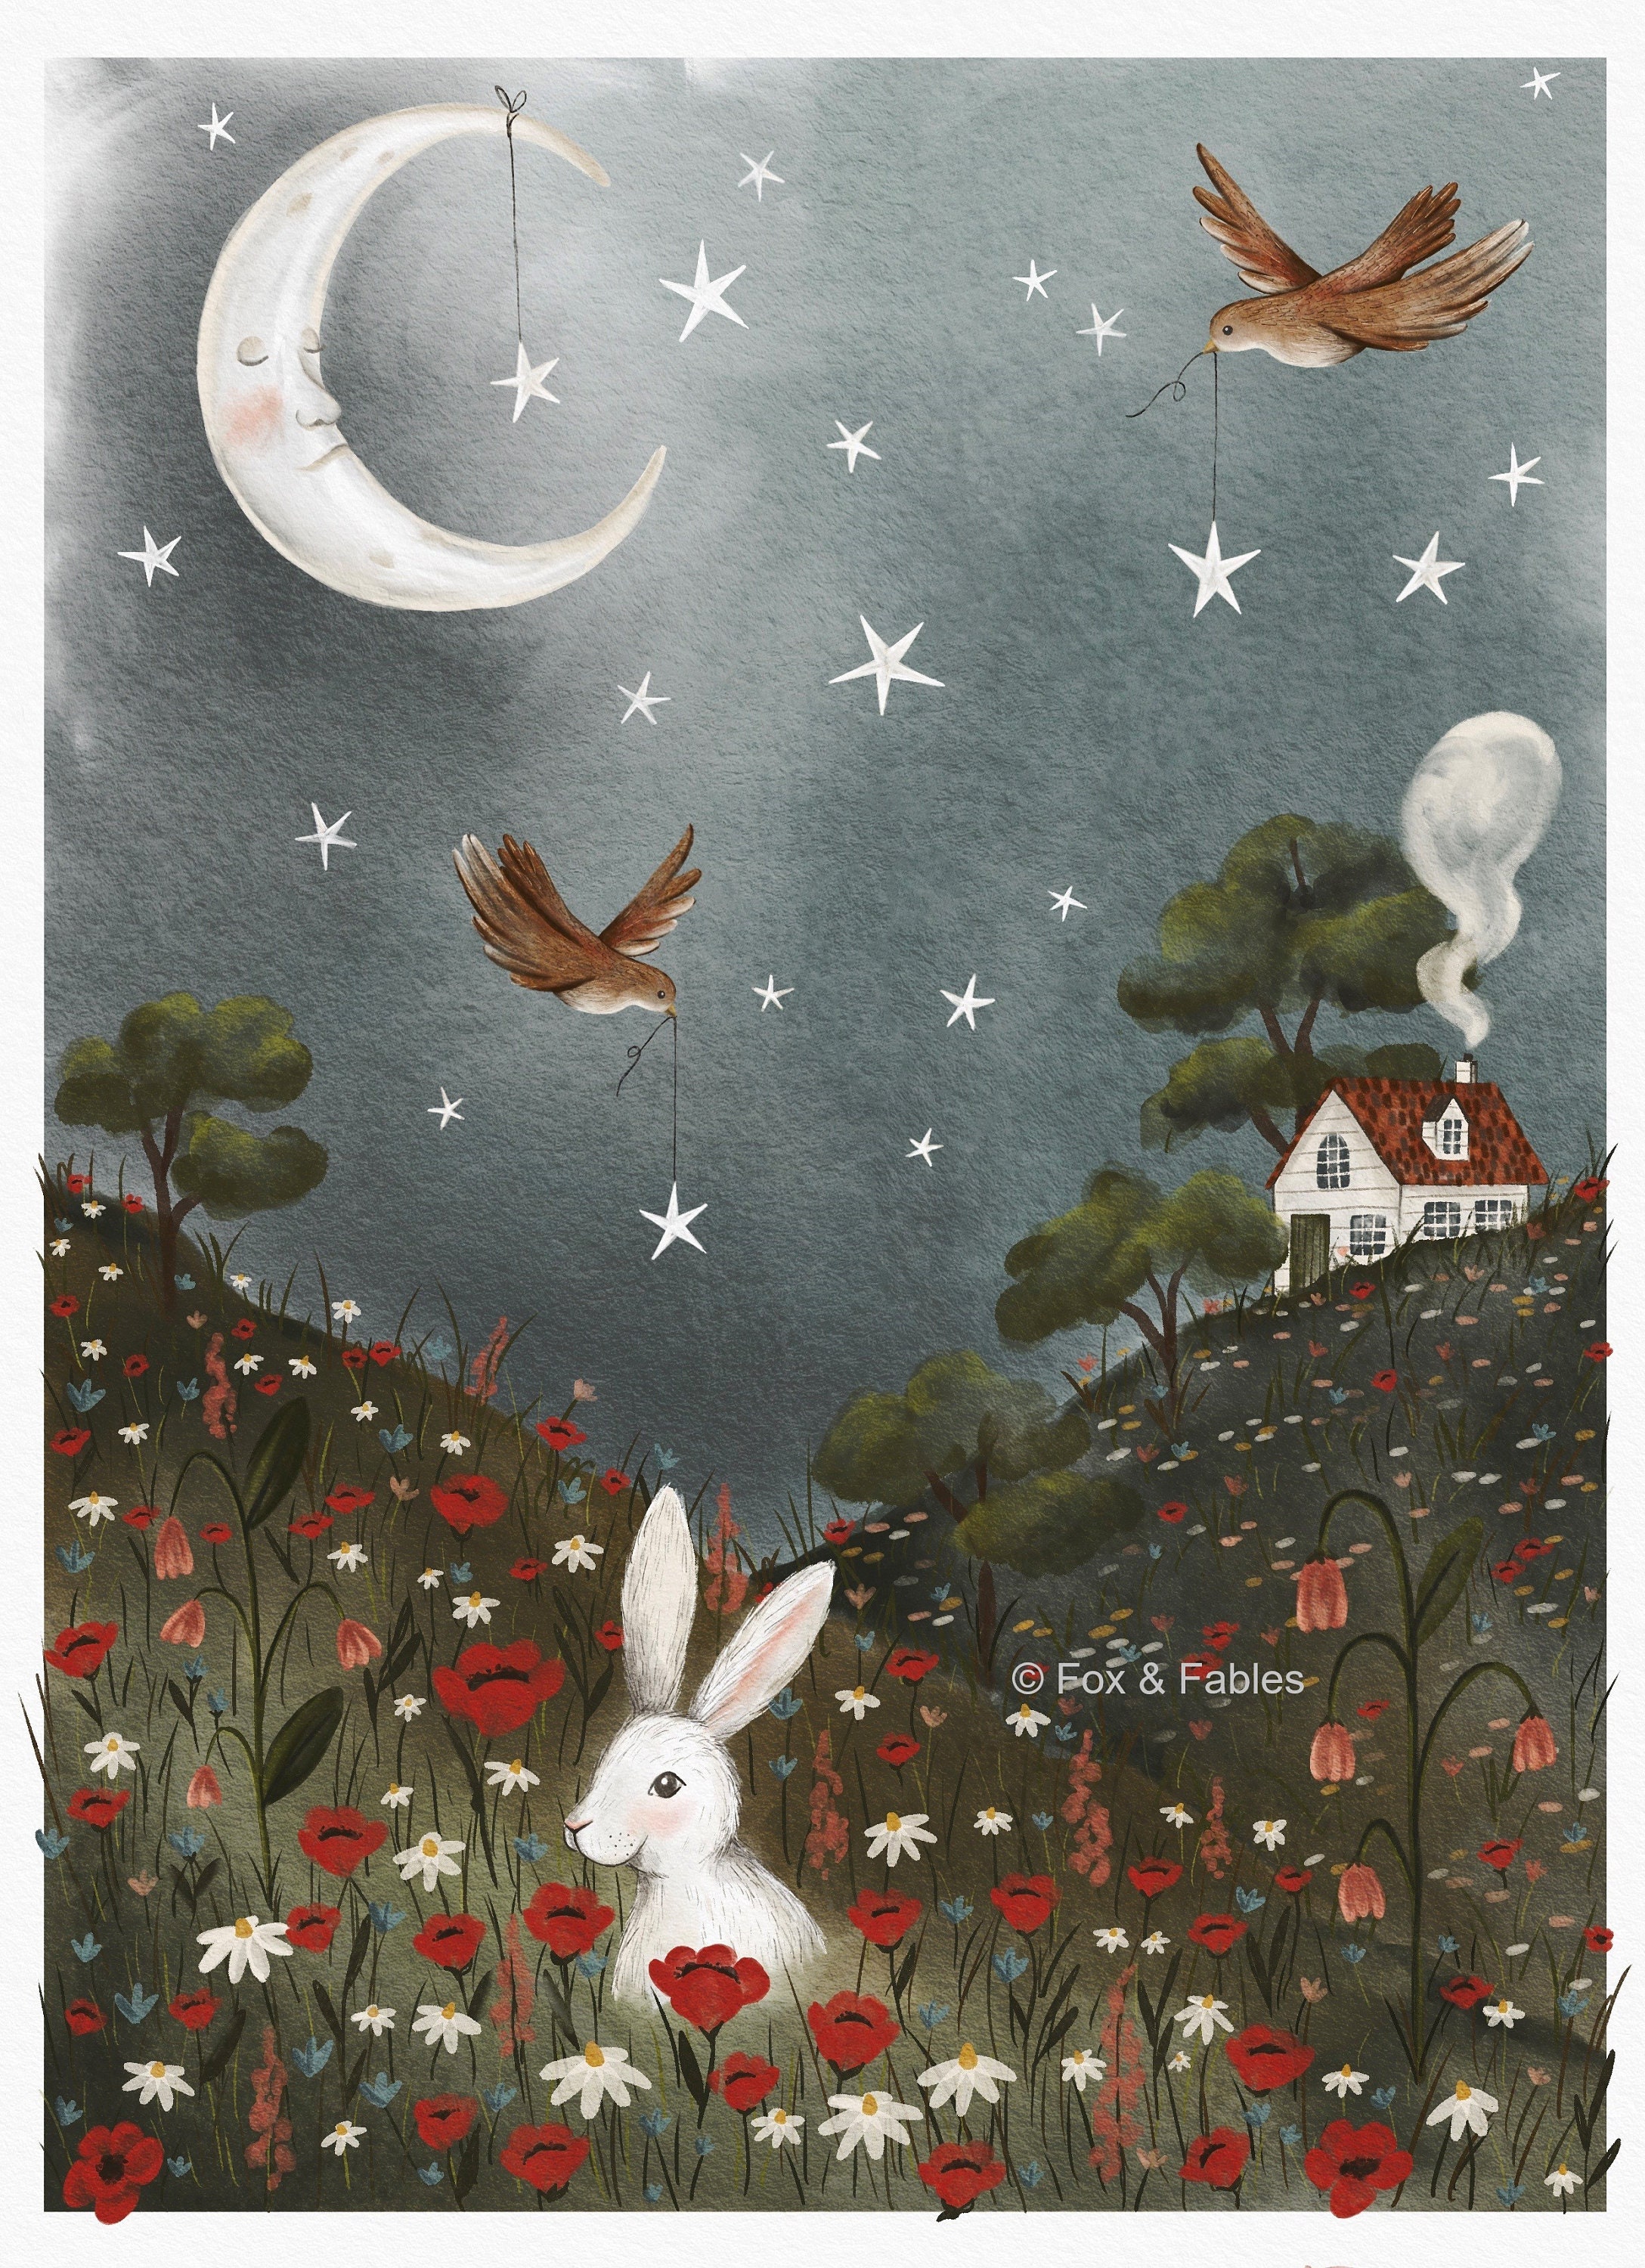 Whimsical Night Meadow Illustration Print Childrens Gift